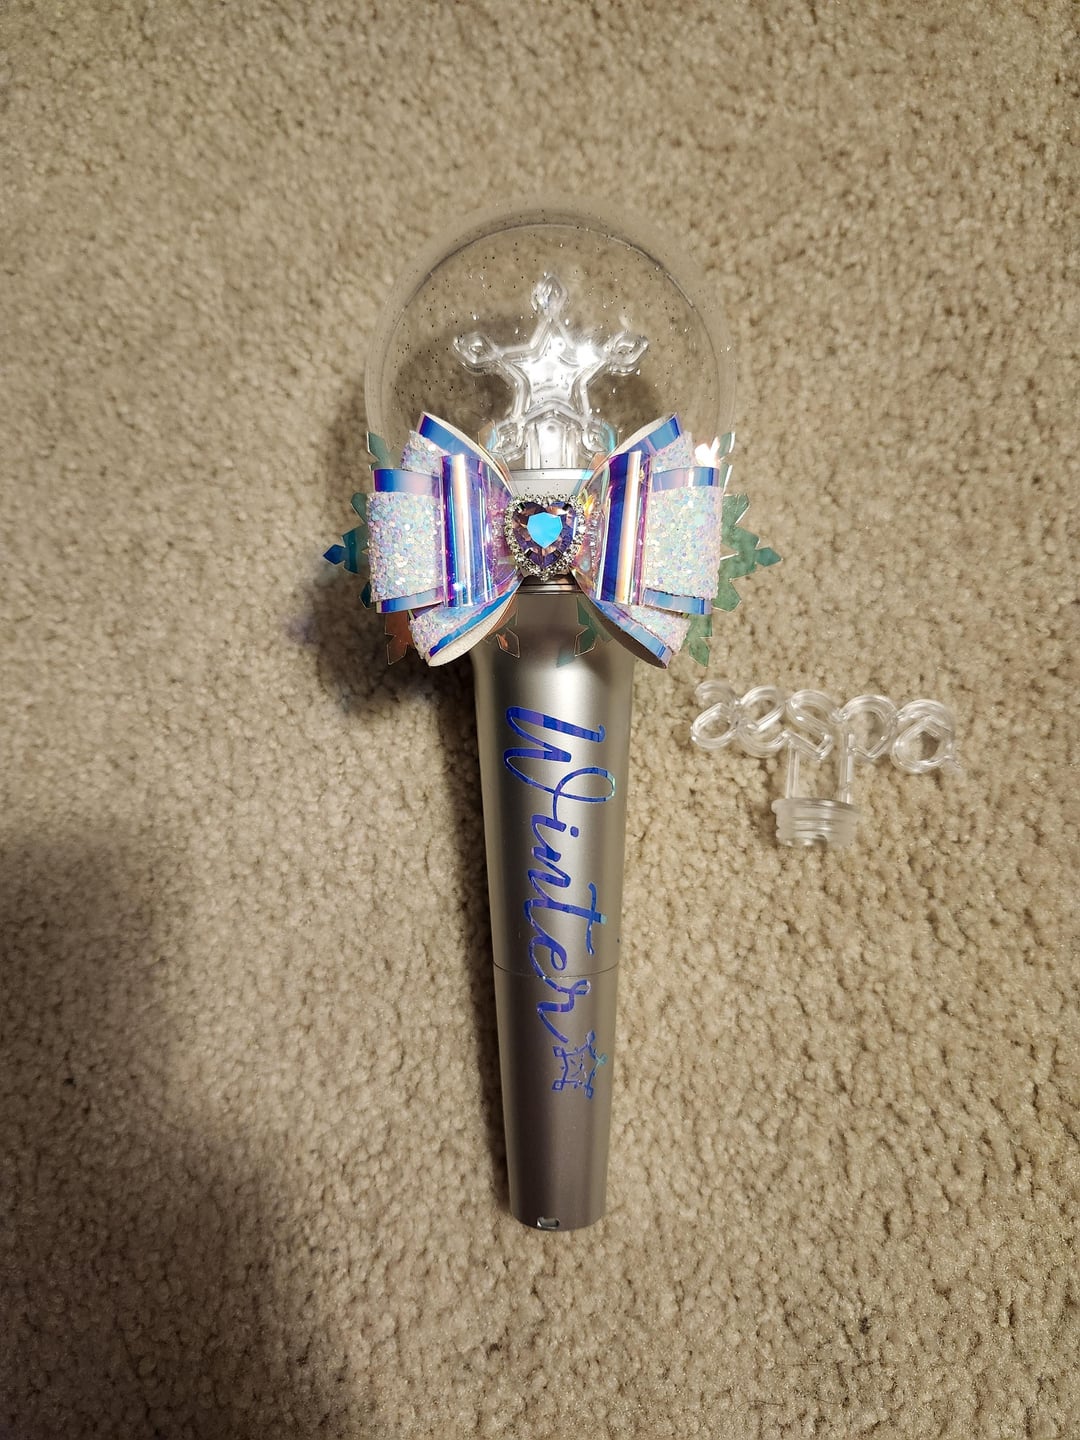 Just Wanted to Share My aespa Lightstick!